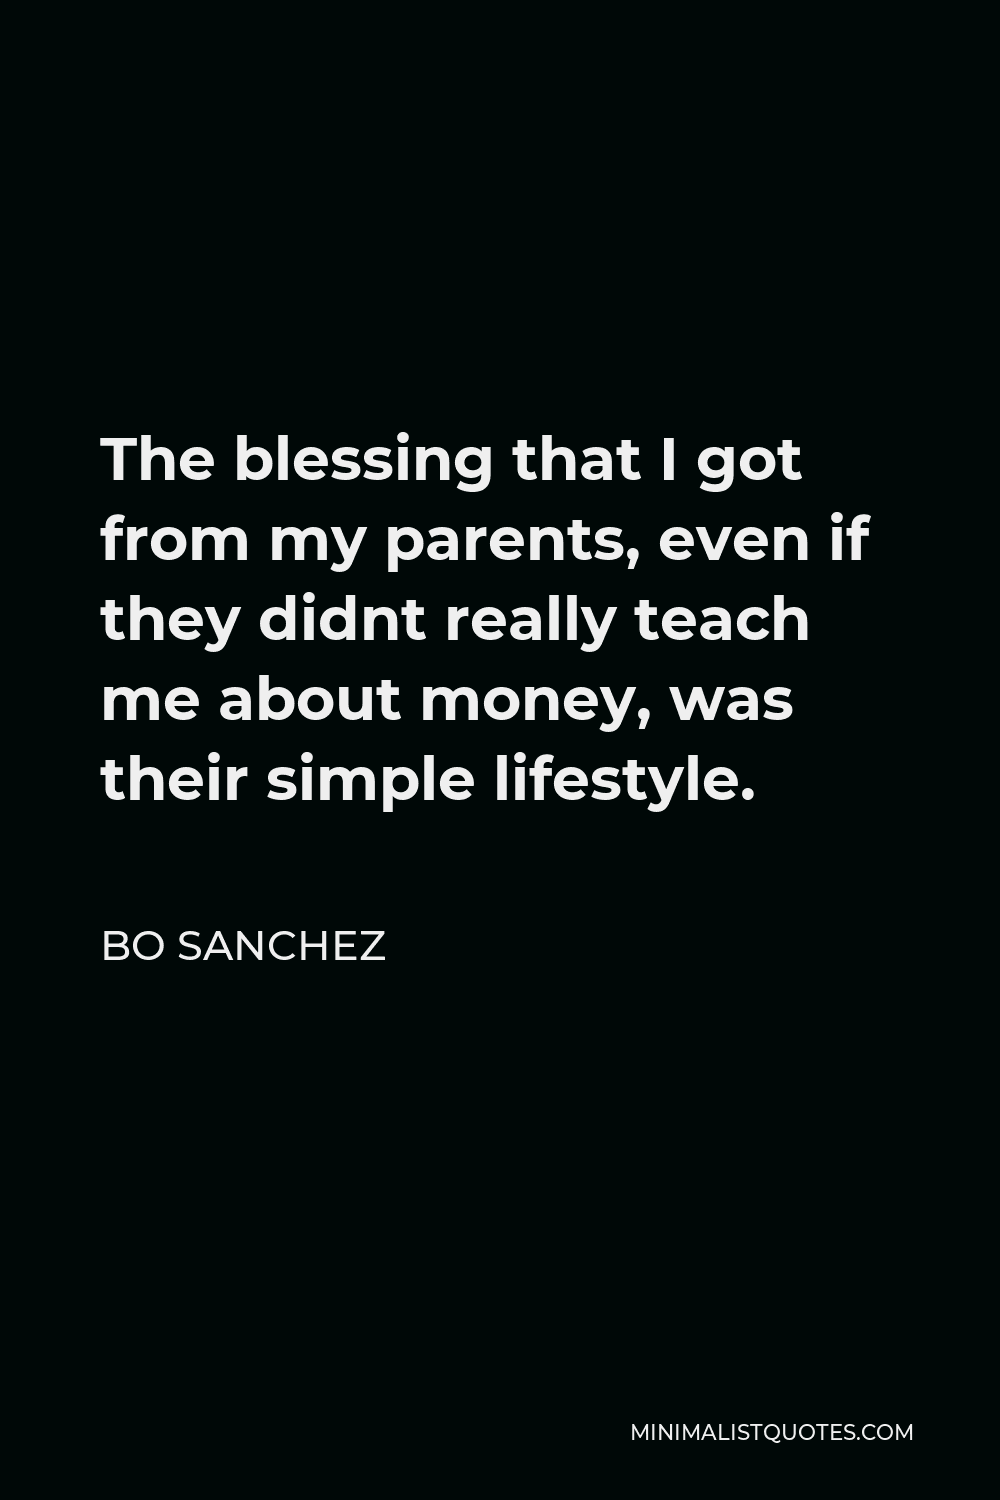 Bo Sanchez Quote - The blessing that I got from my parents, even if they didnt really teach me about money, was their simple lifestyle.